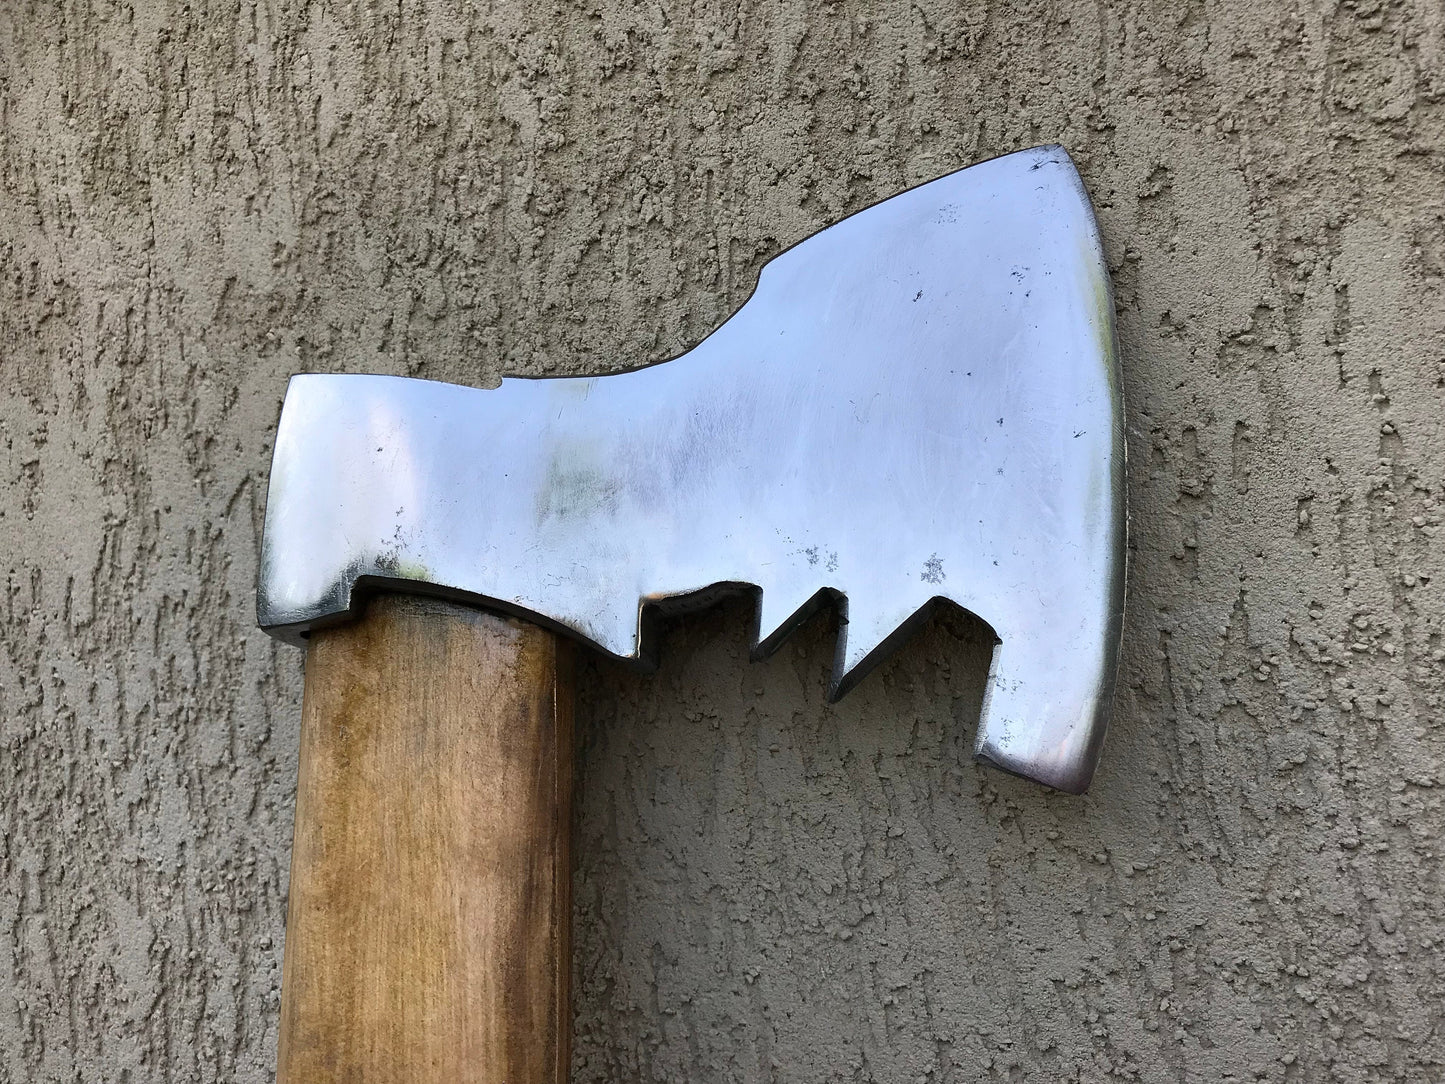 Viking axe, viking hatchet, medieval axe, camping,hunting, mens gifts, iron gift for him, anniversary gift,gifts for men, manly iron gifts